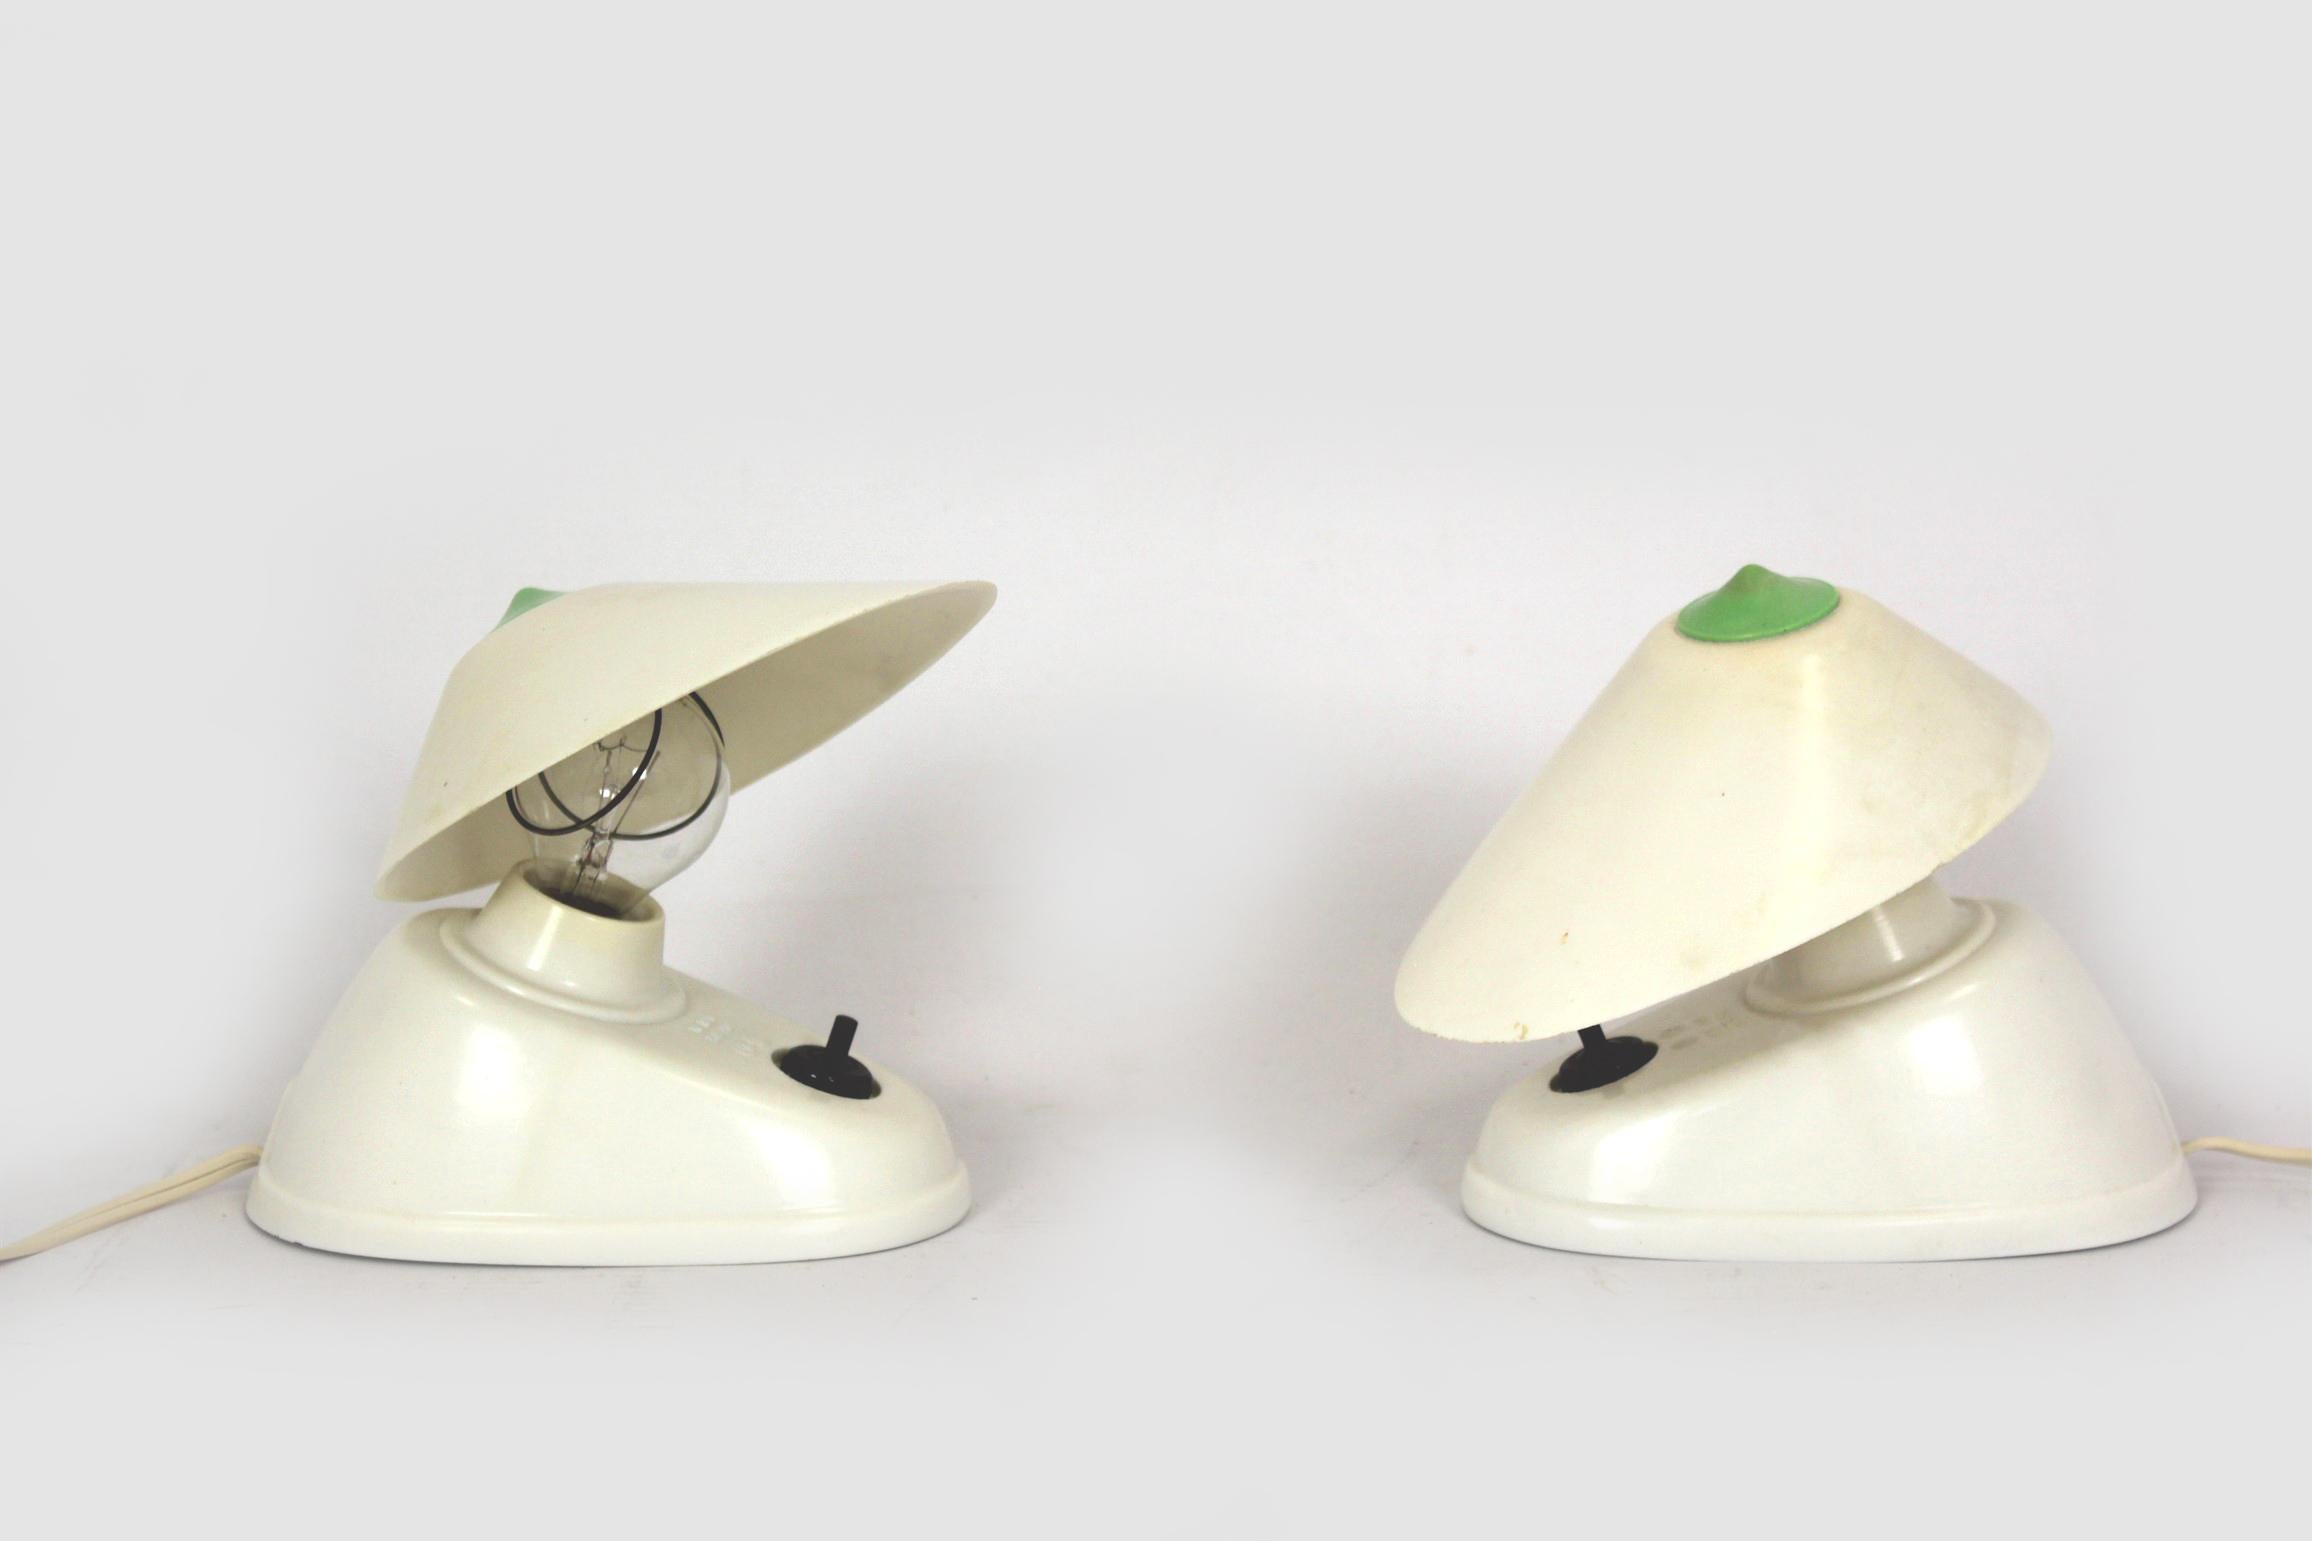 Bakelite Bauhaus Table Lamps from ESC, 1940s, Set of 2 In Good Condition For Sale In Żory, PL